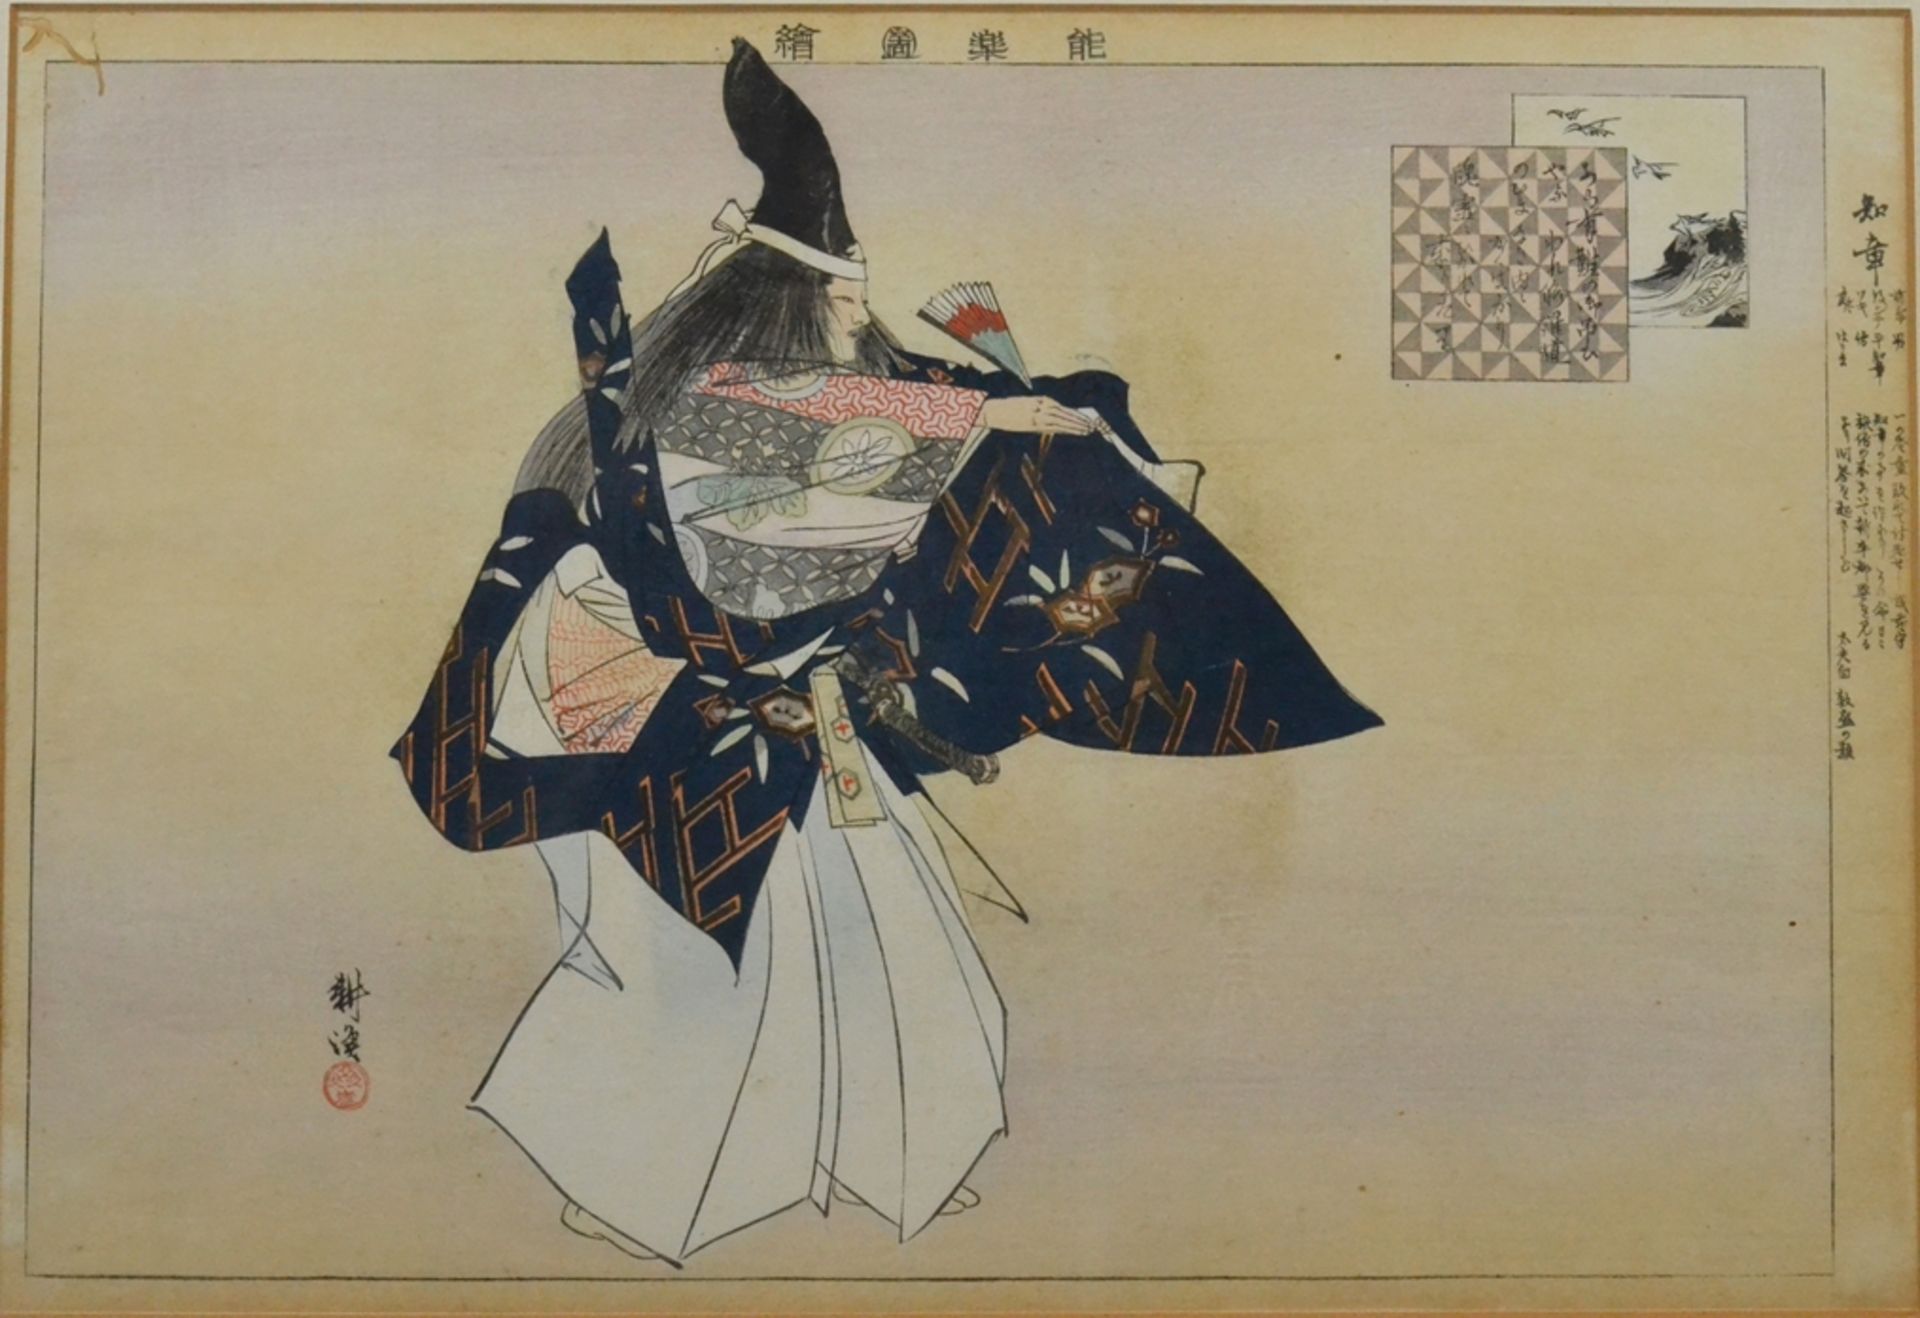 Japanese woodblock print, "Samurai with fan and sword", 19th century, passepartout, 32x42,5cm (with